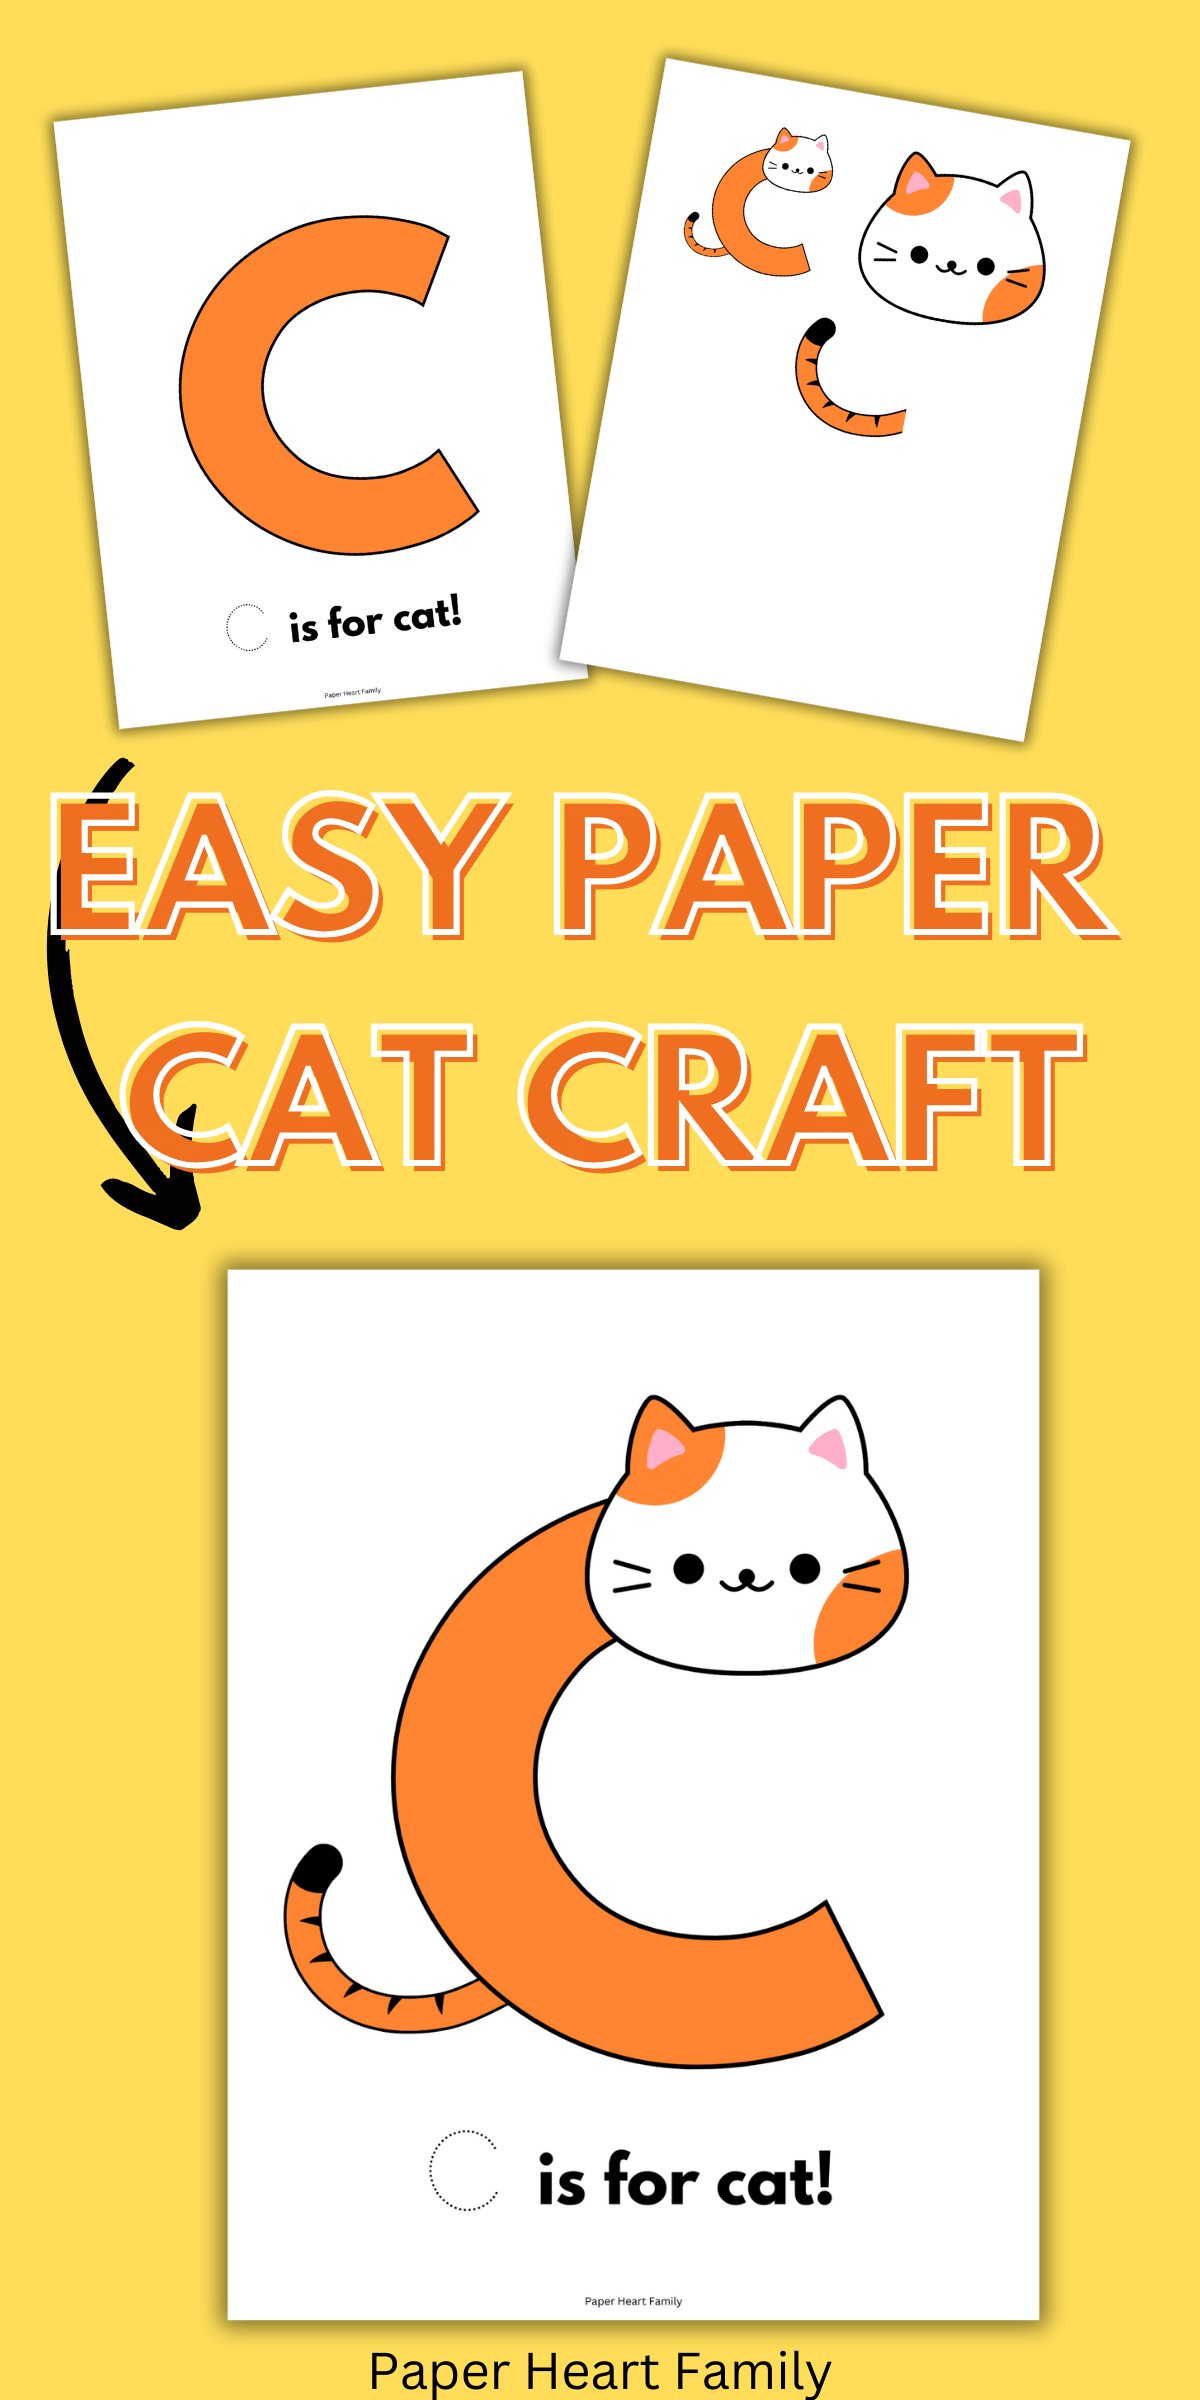 Orange and white cat with cut and paste head and tail.